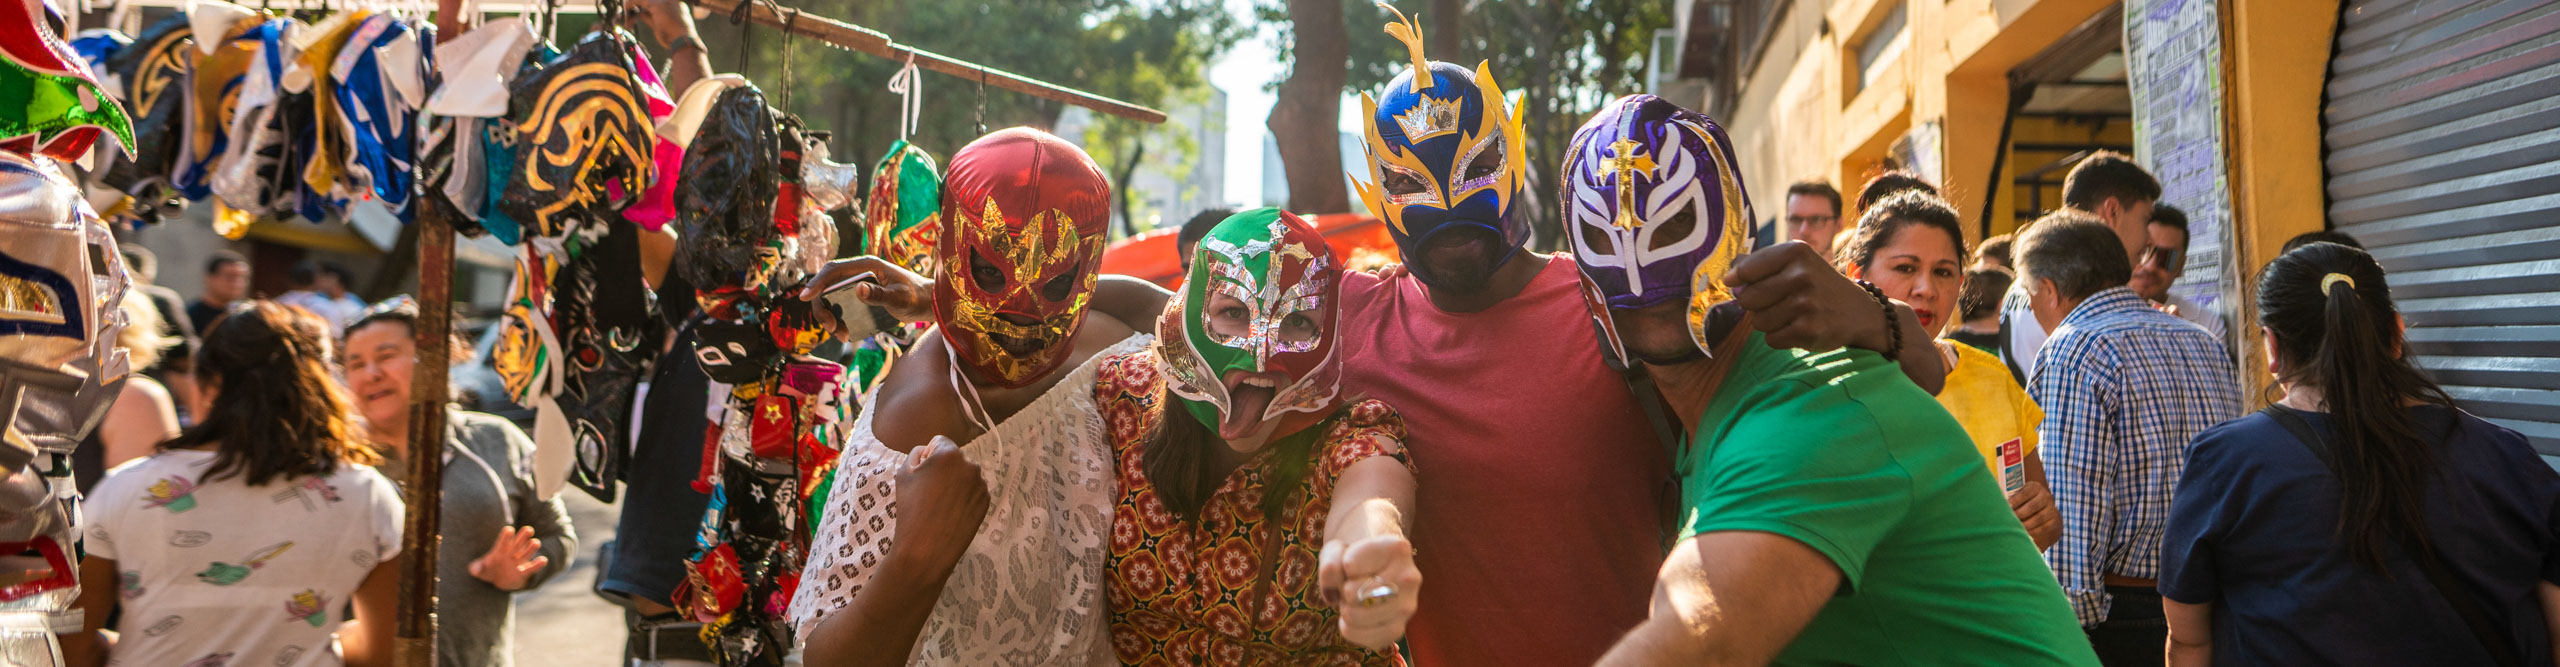 Group in Lucha libre masks in the street in mexico 